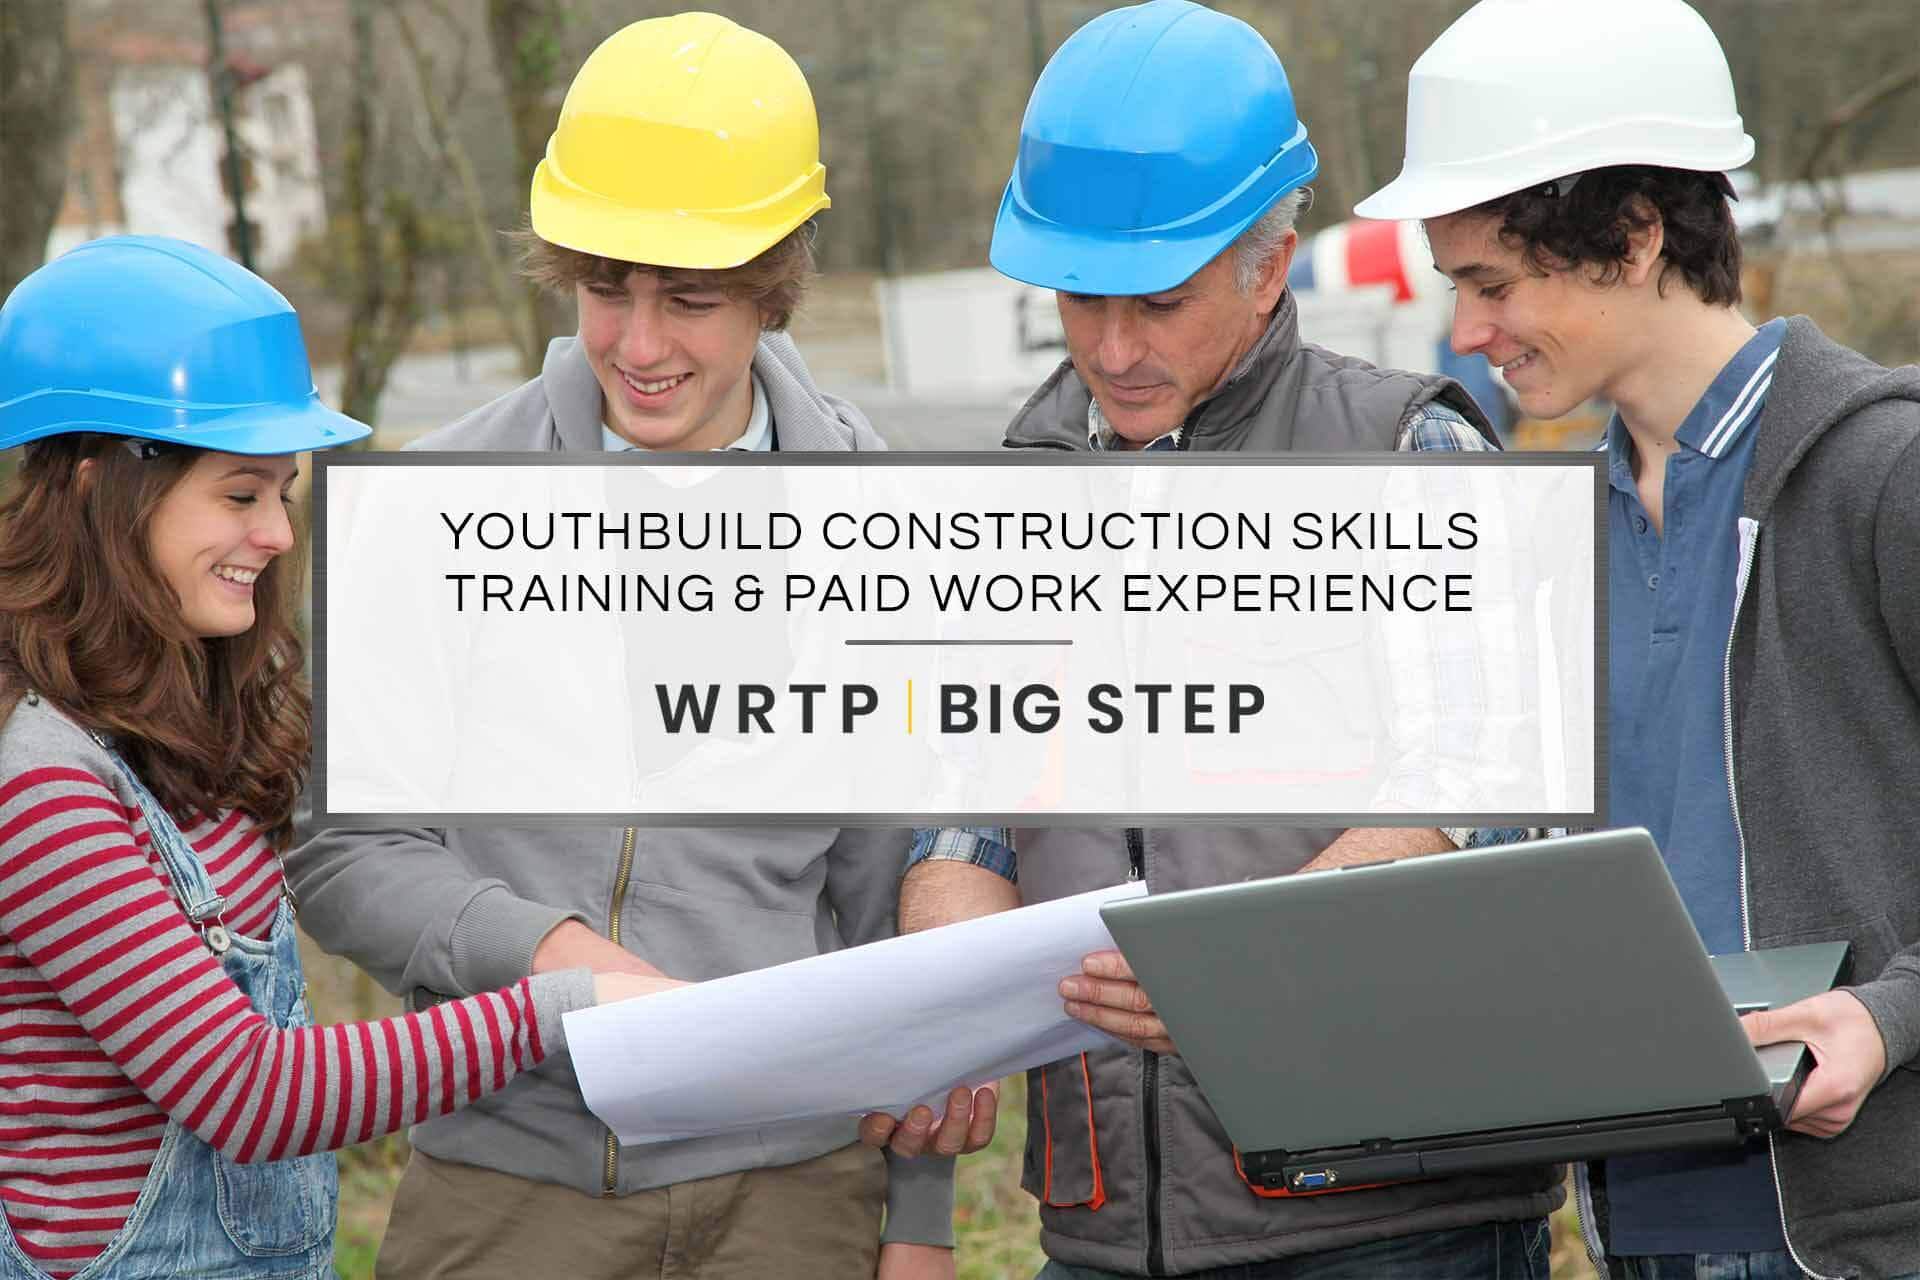 YouthBuild Construction Skills Training & Paid Work Experience